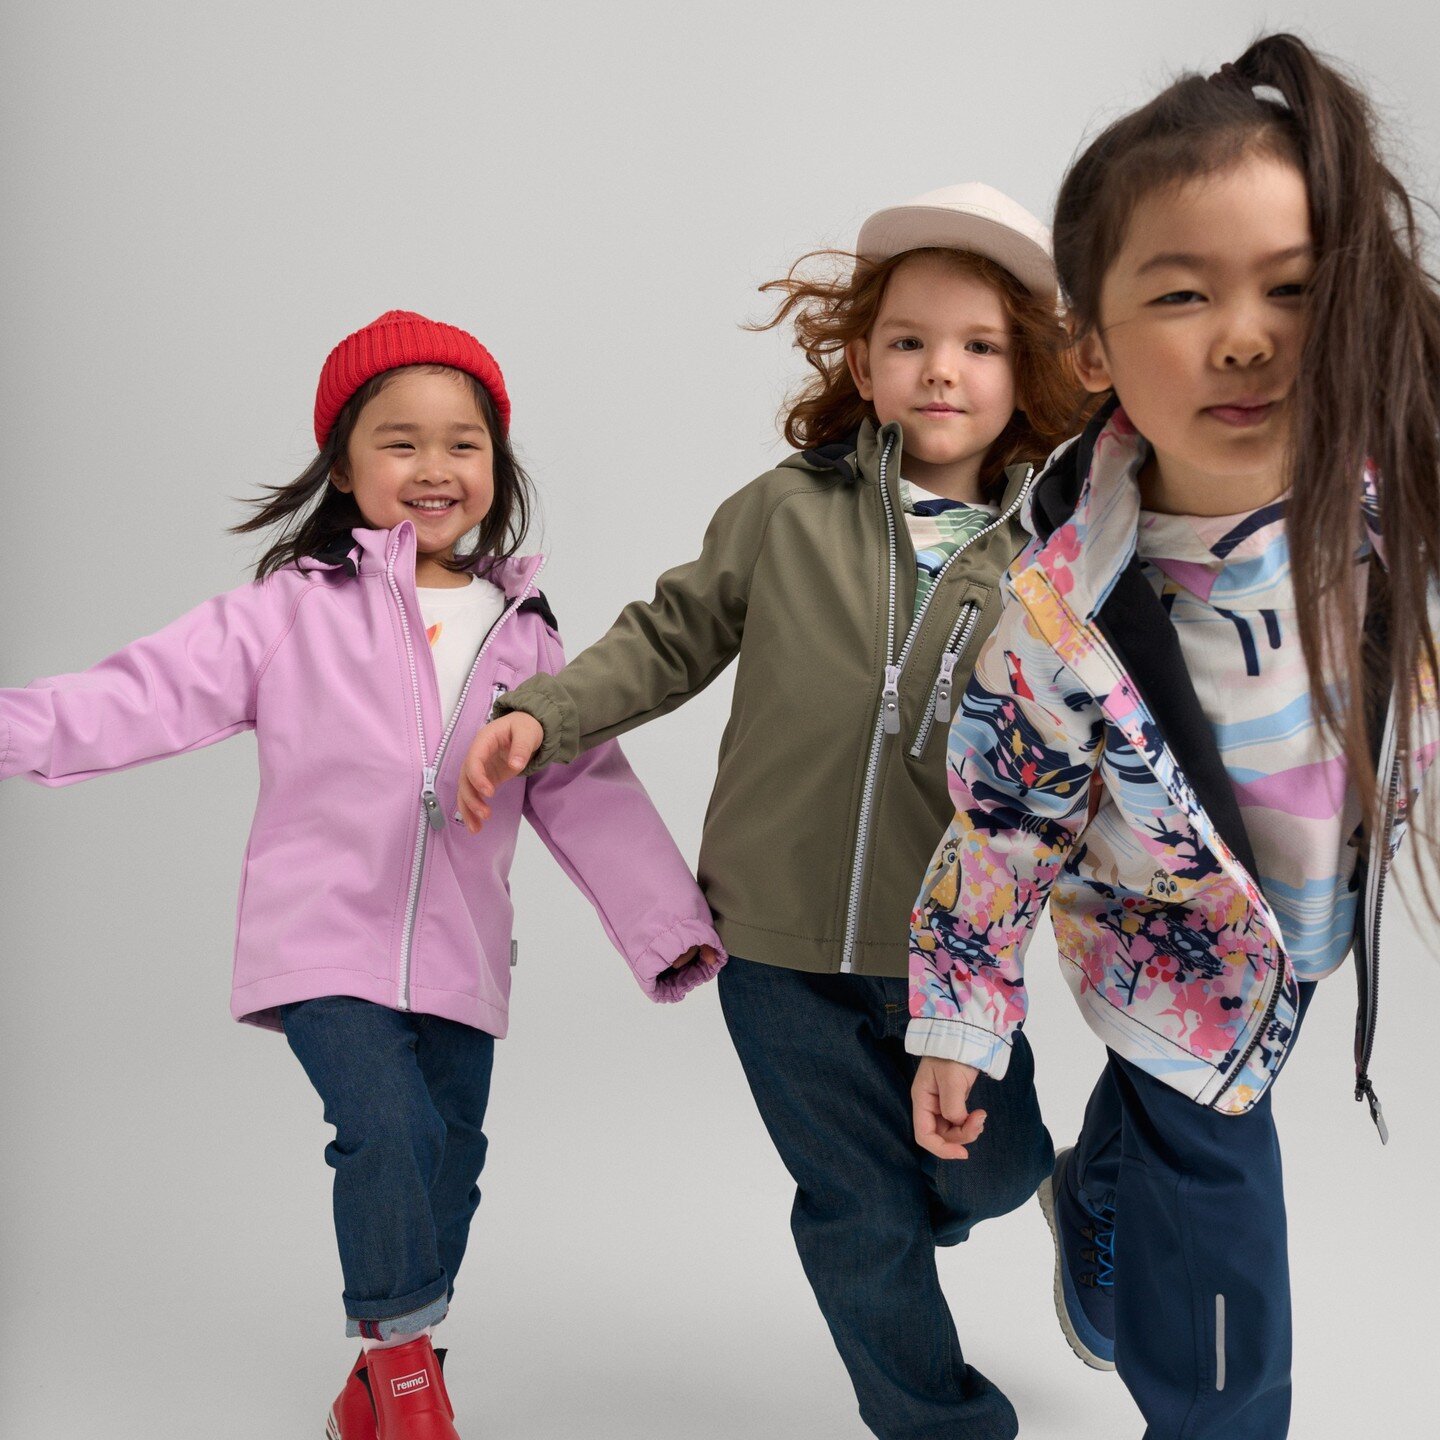 Alpin Sales continues to grow! REIMA's mission is to encourage children to discover the joy of movement in the outdoors. What an amazing idea! #reima